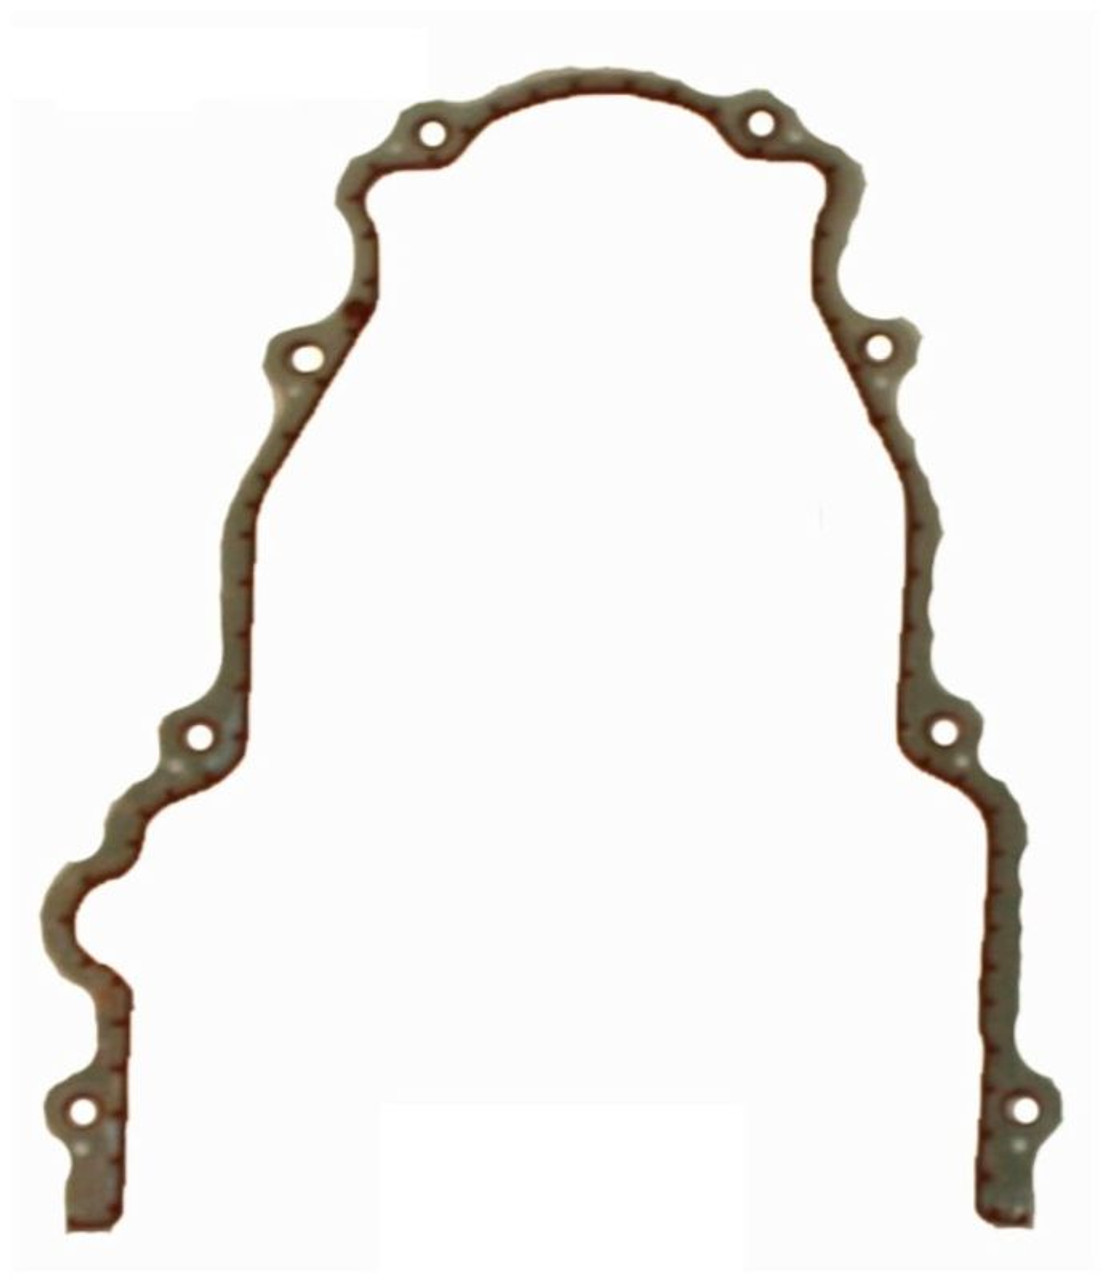 2007 Chevrolet Monte Carlo 5.3L Engine Timing Cover Gasket TCG293-A -396